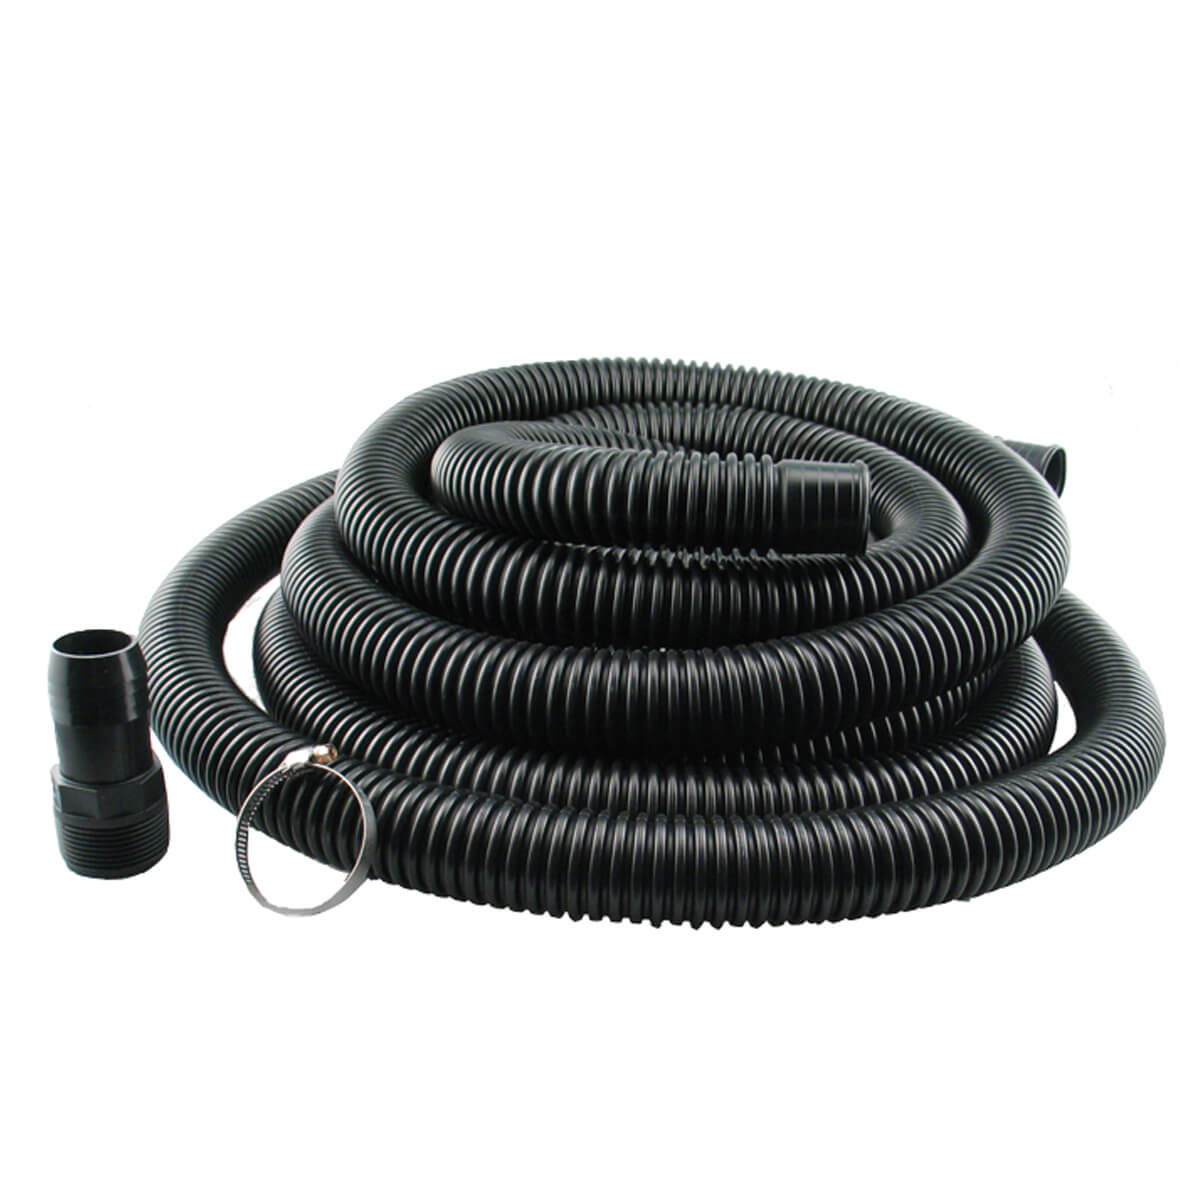 Sump Pump Discharge Kit - 1-1/4-in x 24-ft